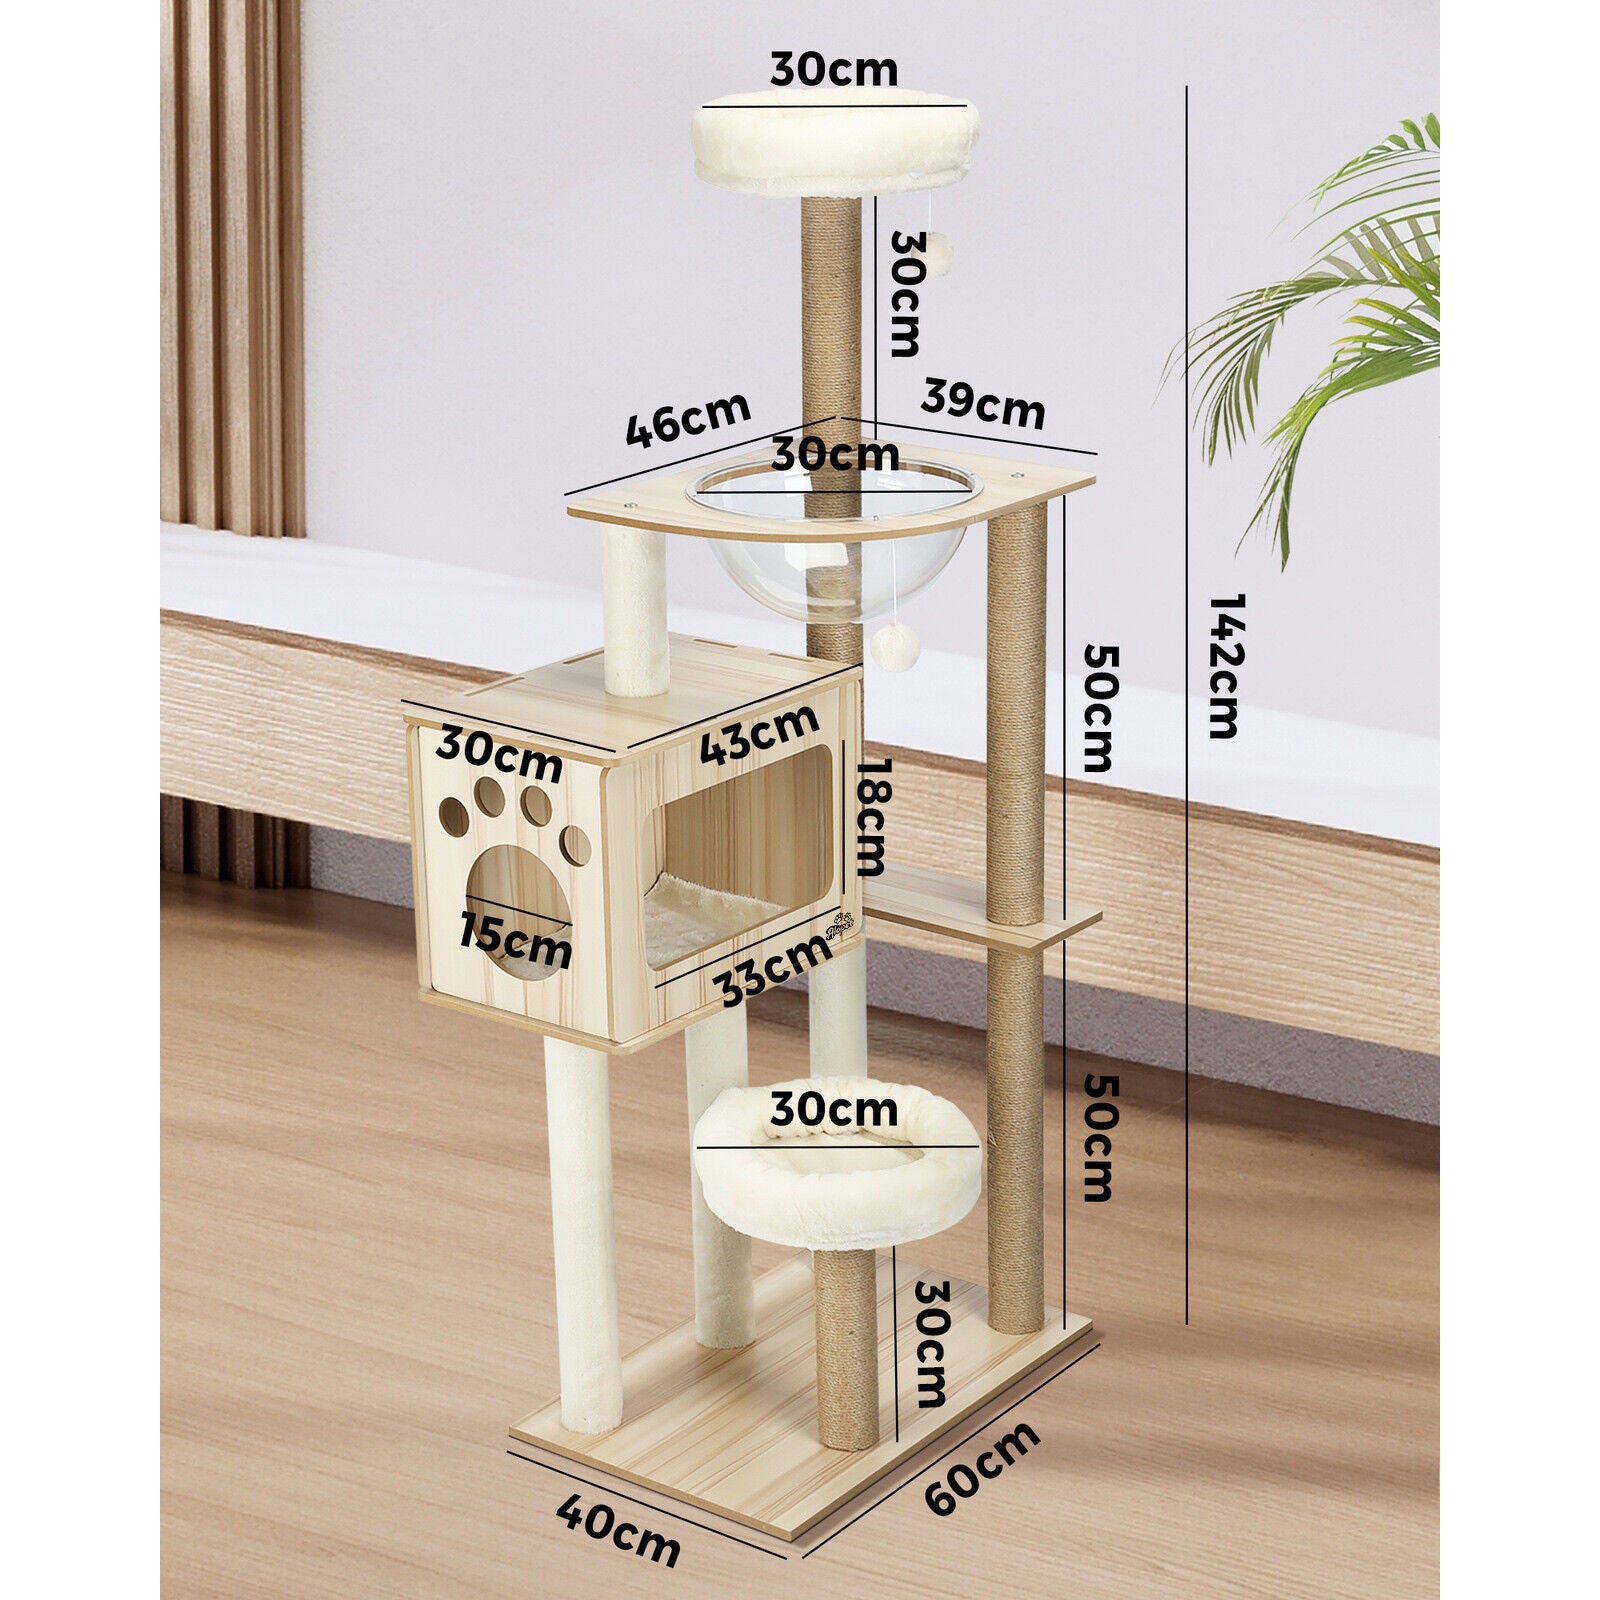 142cm Cat Tree Tower Scratching Post Scratcher Cats Condo House Bed Furniture